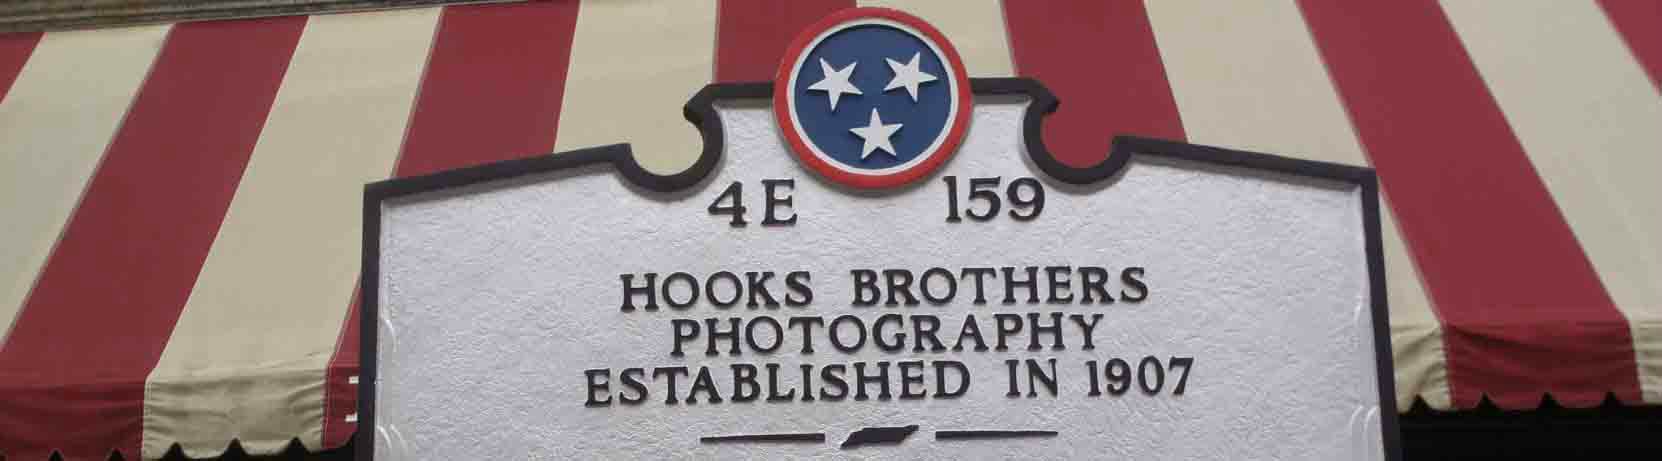 web header image showing part of the Hooks Brothers Photography sign, beale Street, memphis